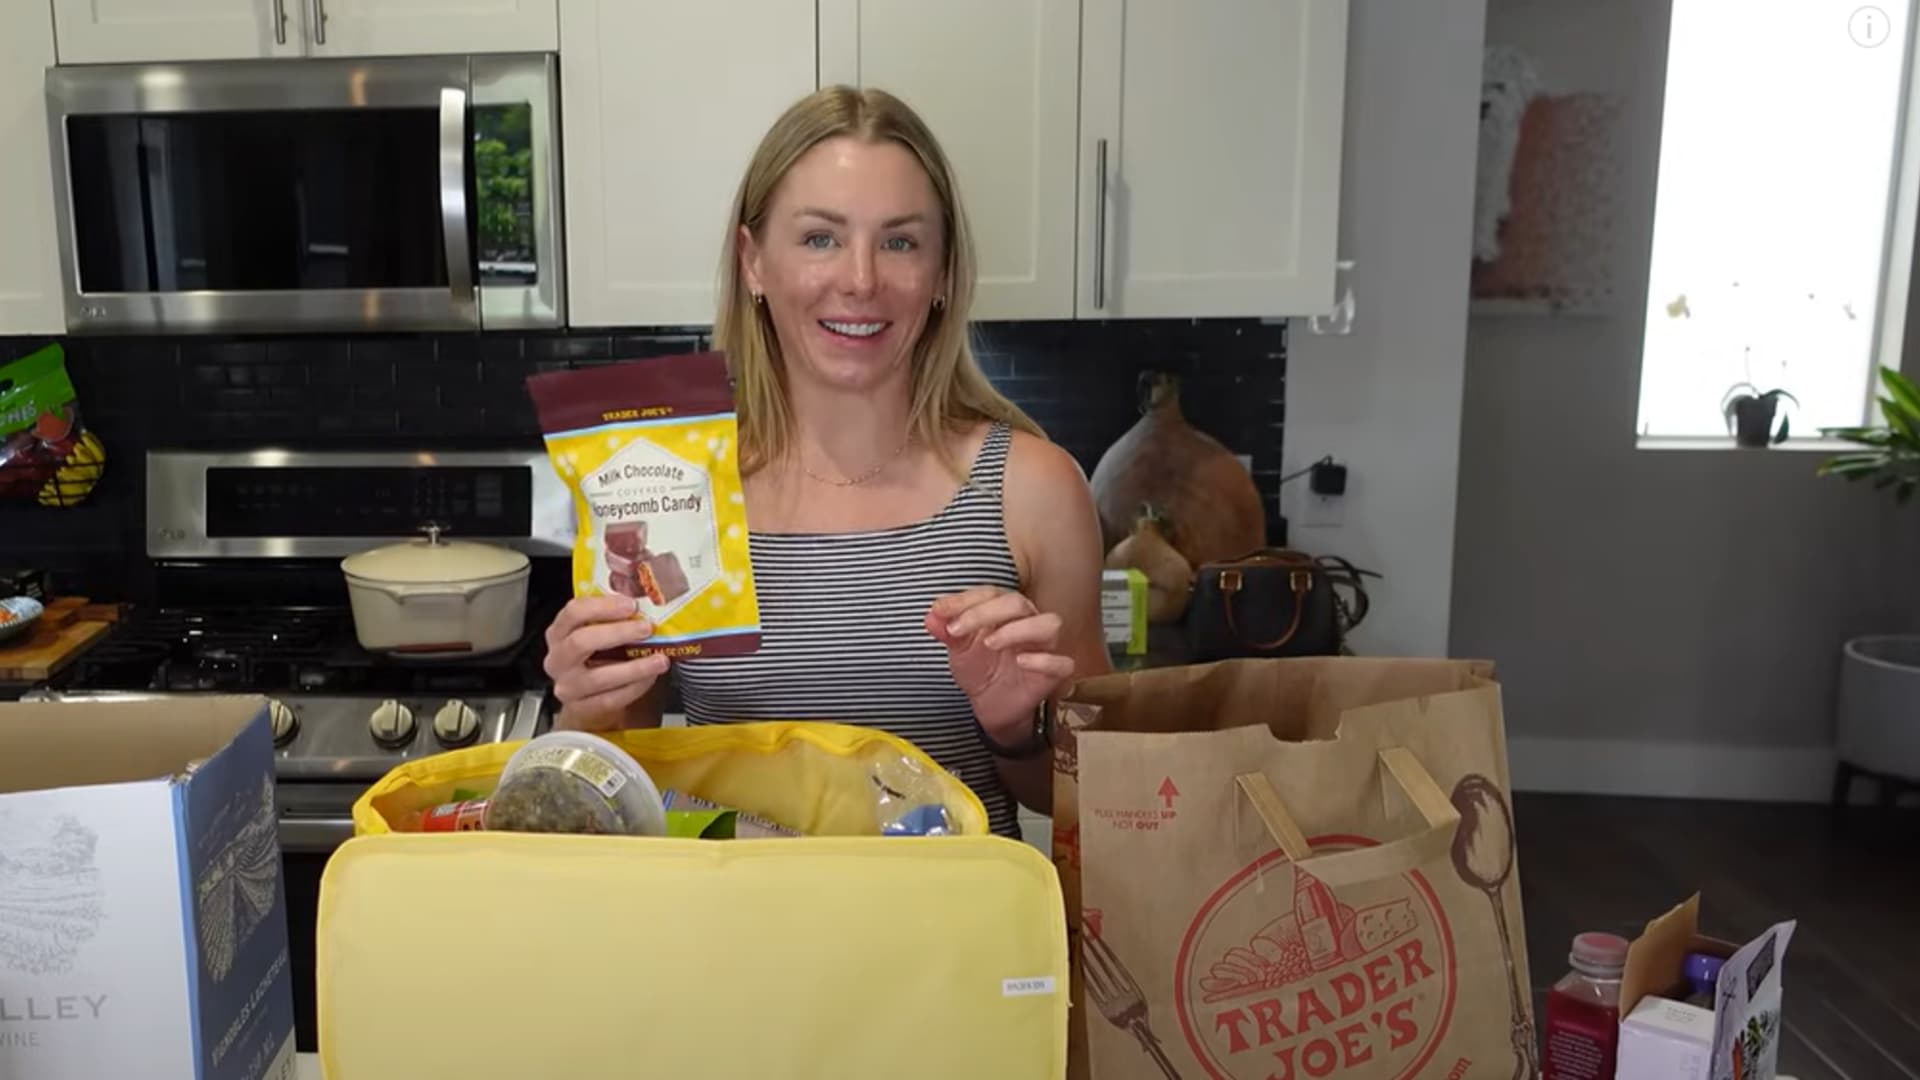 Trader Joe’s superfan with 2 million followers: The 9 best things to buy right now—'I pride myself on uncovering hidden gems'